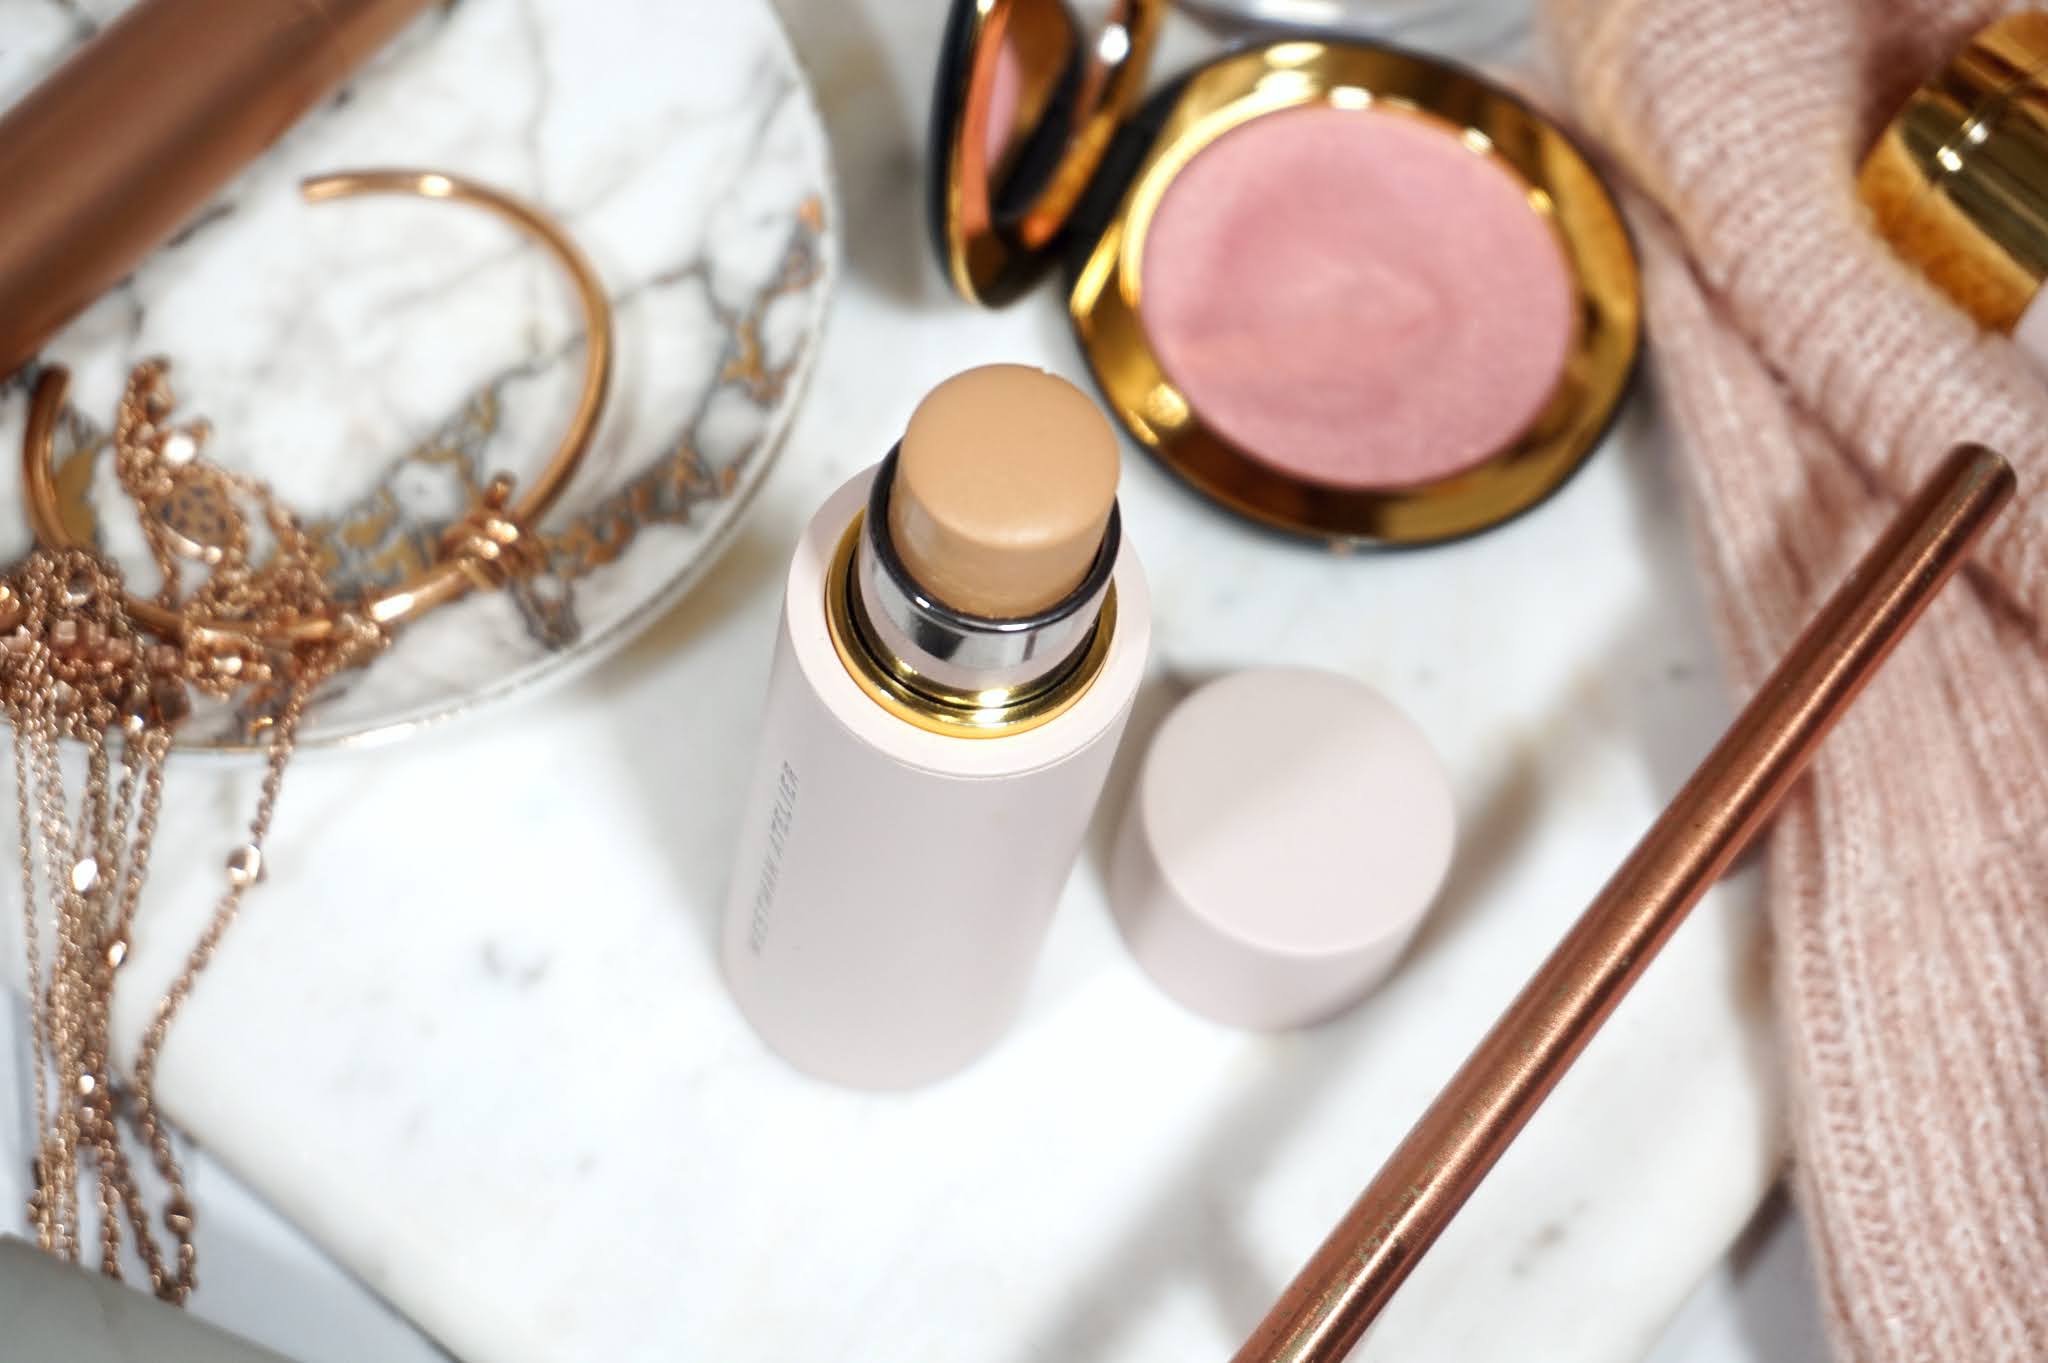 Westman Atelier Vital Skin Foundation Stick Review and Swatches